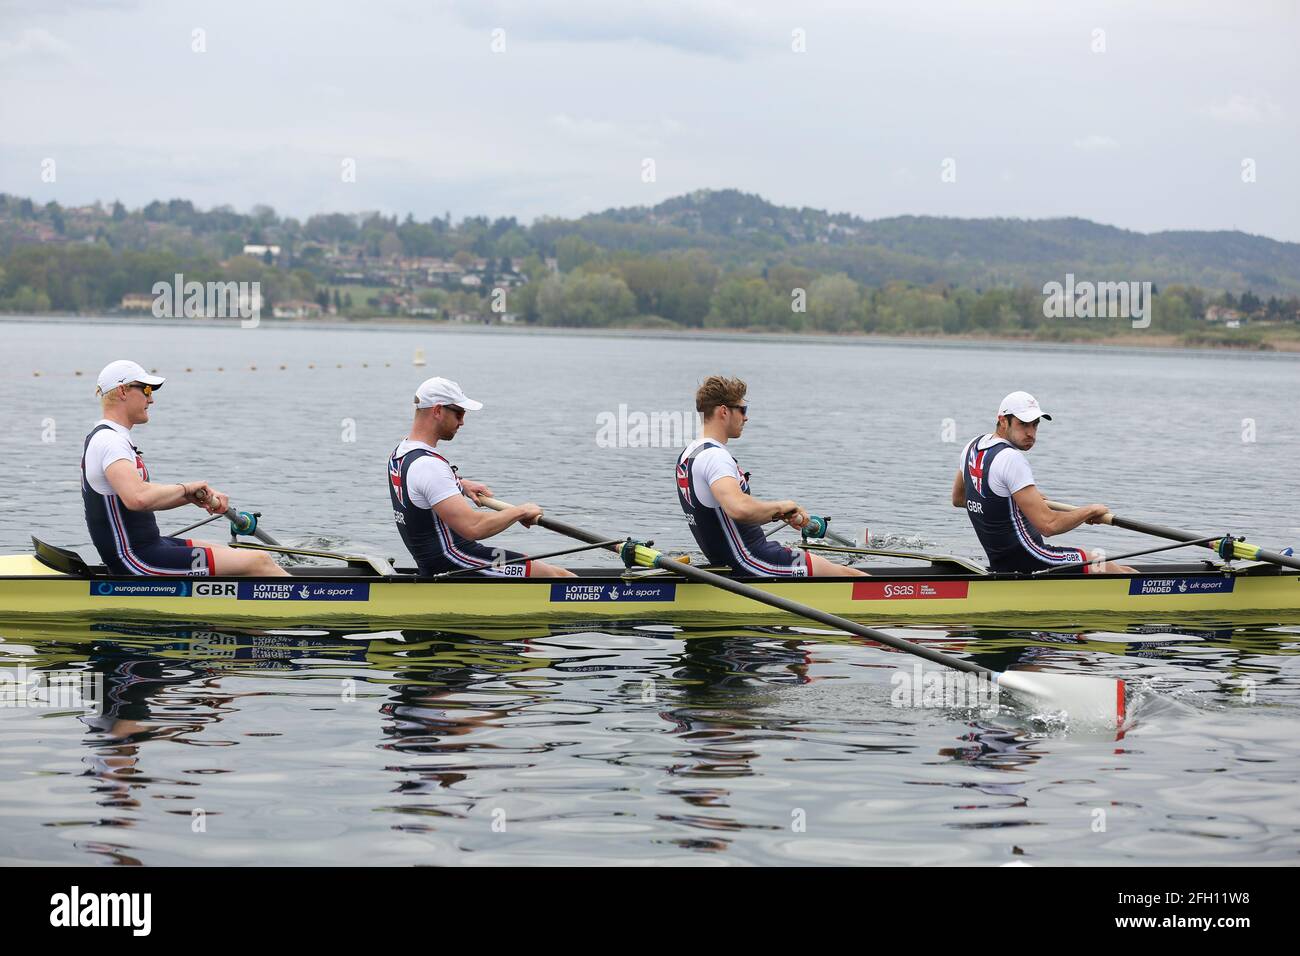 Oliver Robert George Cook, Matthew Rossiter, Rory Gibbs and Sholto Carnegie of Great Brtiain win the Men's Four Semifinal A/B 2 on Day 2 at the Europe Stock Photo